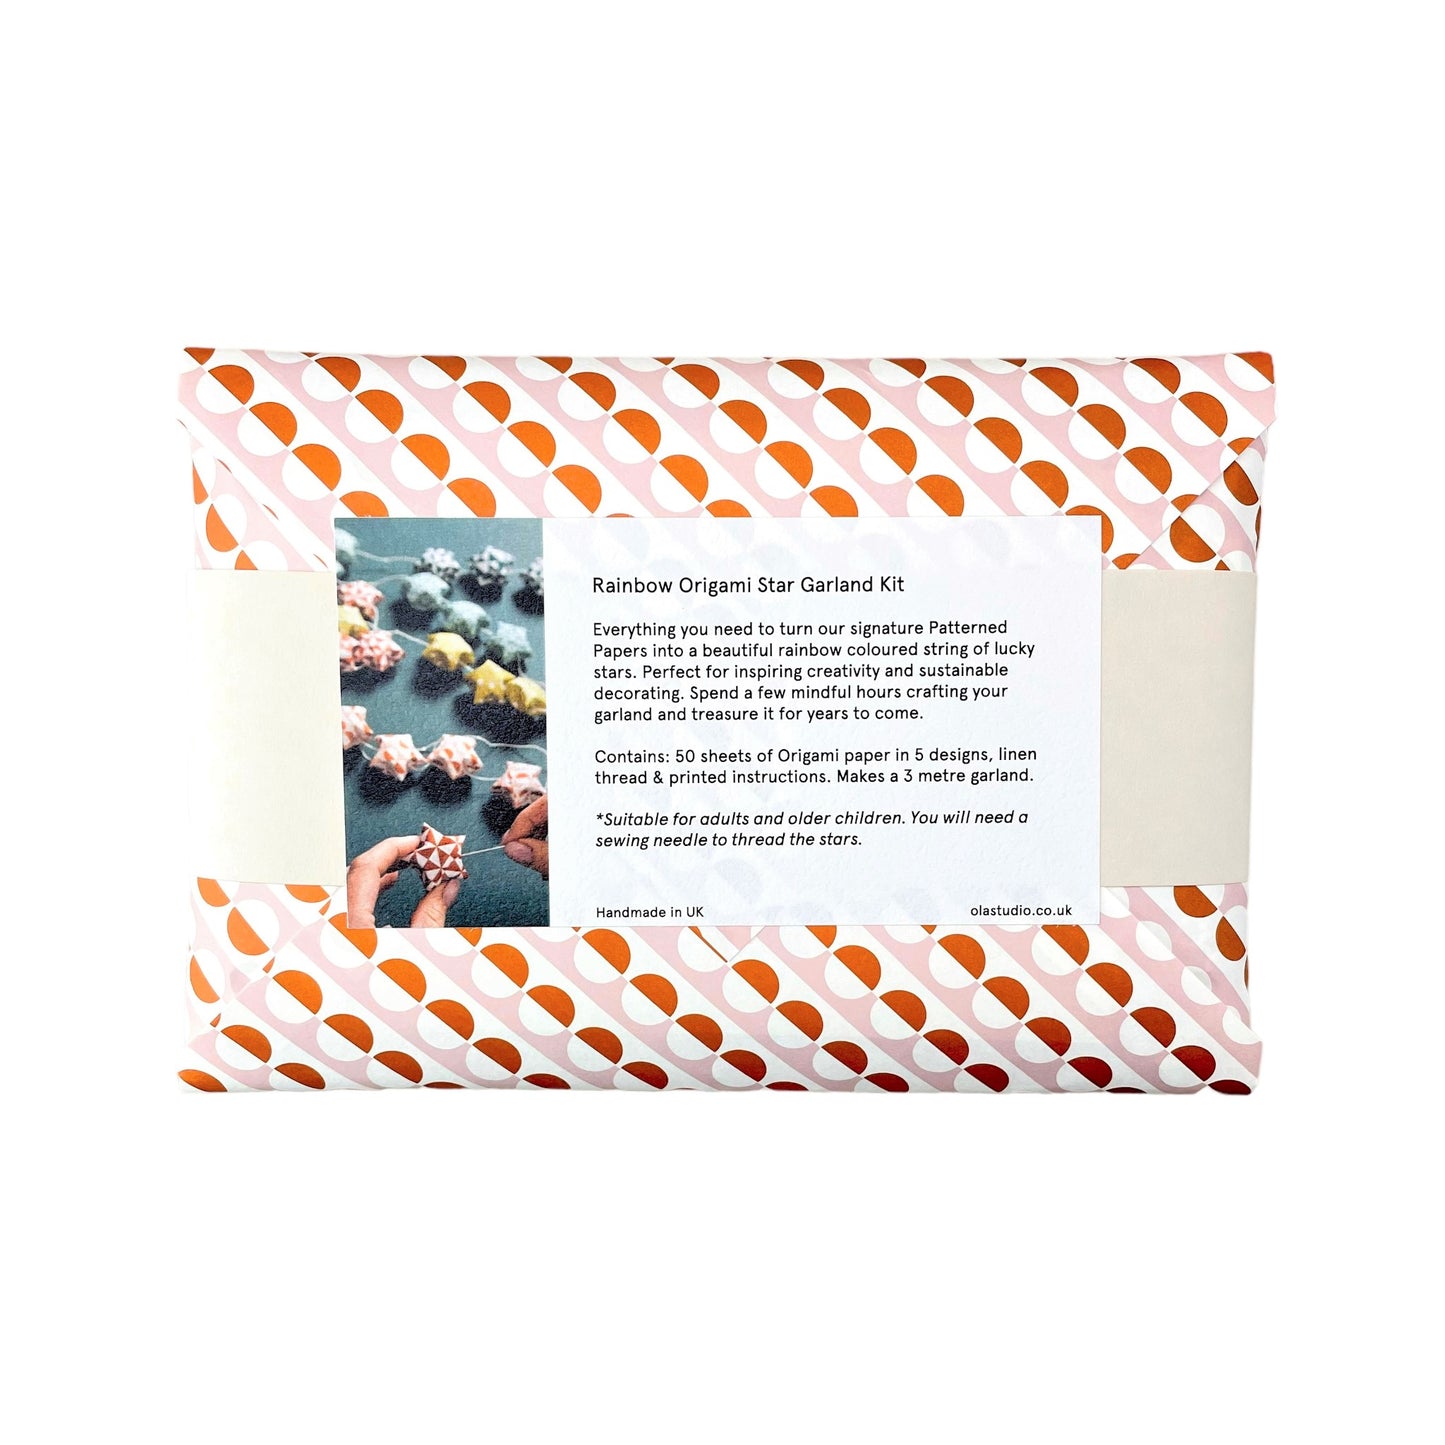 A garland of small paper origami patterned stars "lucky stars" , pictured is the reverse of the outer pink and orange envelope packaging with contents